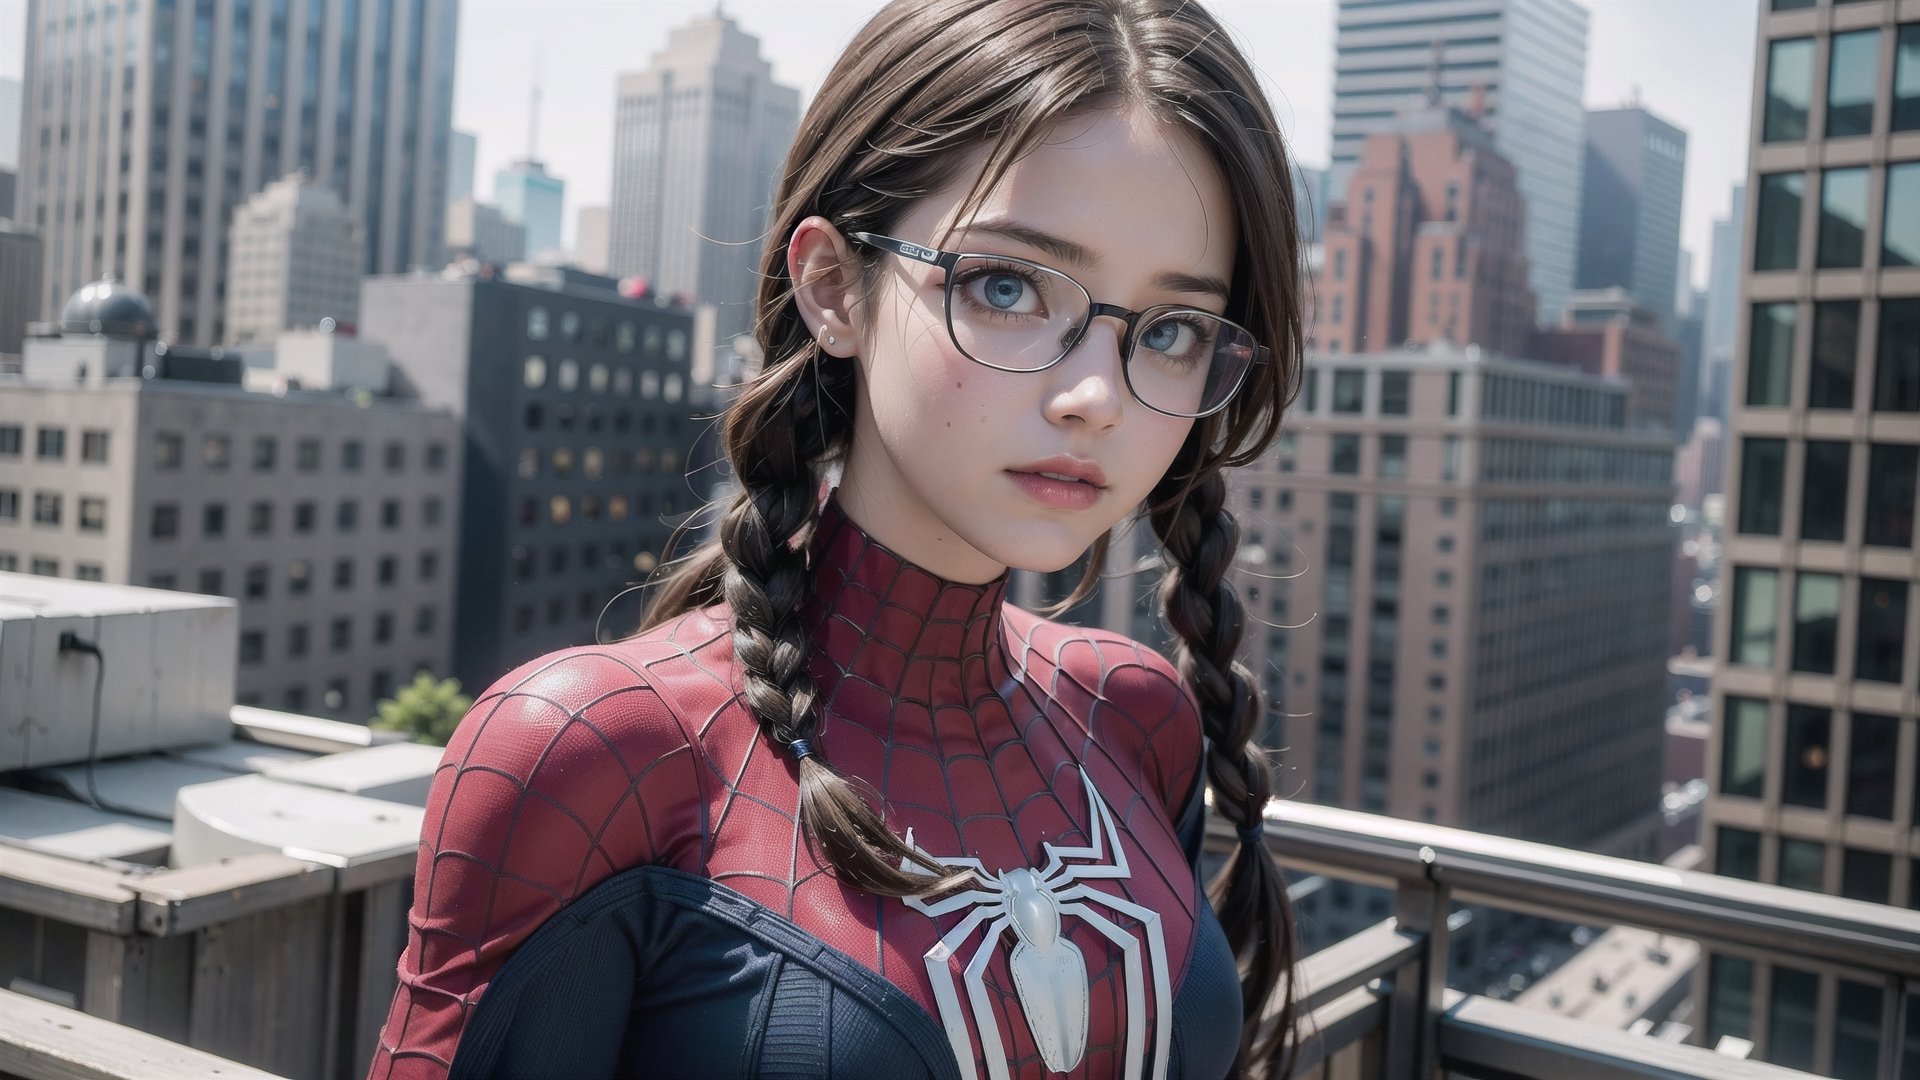 (masterpiece), best quality, high resolution, highly detailed, detailed background, perfect lighting, The student council girl with twin braids and glasses, photo of perfect eyes ,spider-man costume, on a rooftop in new york city, 